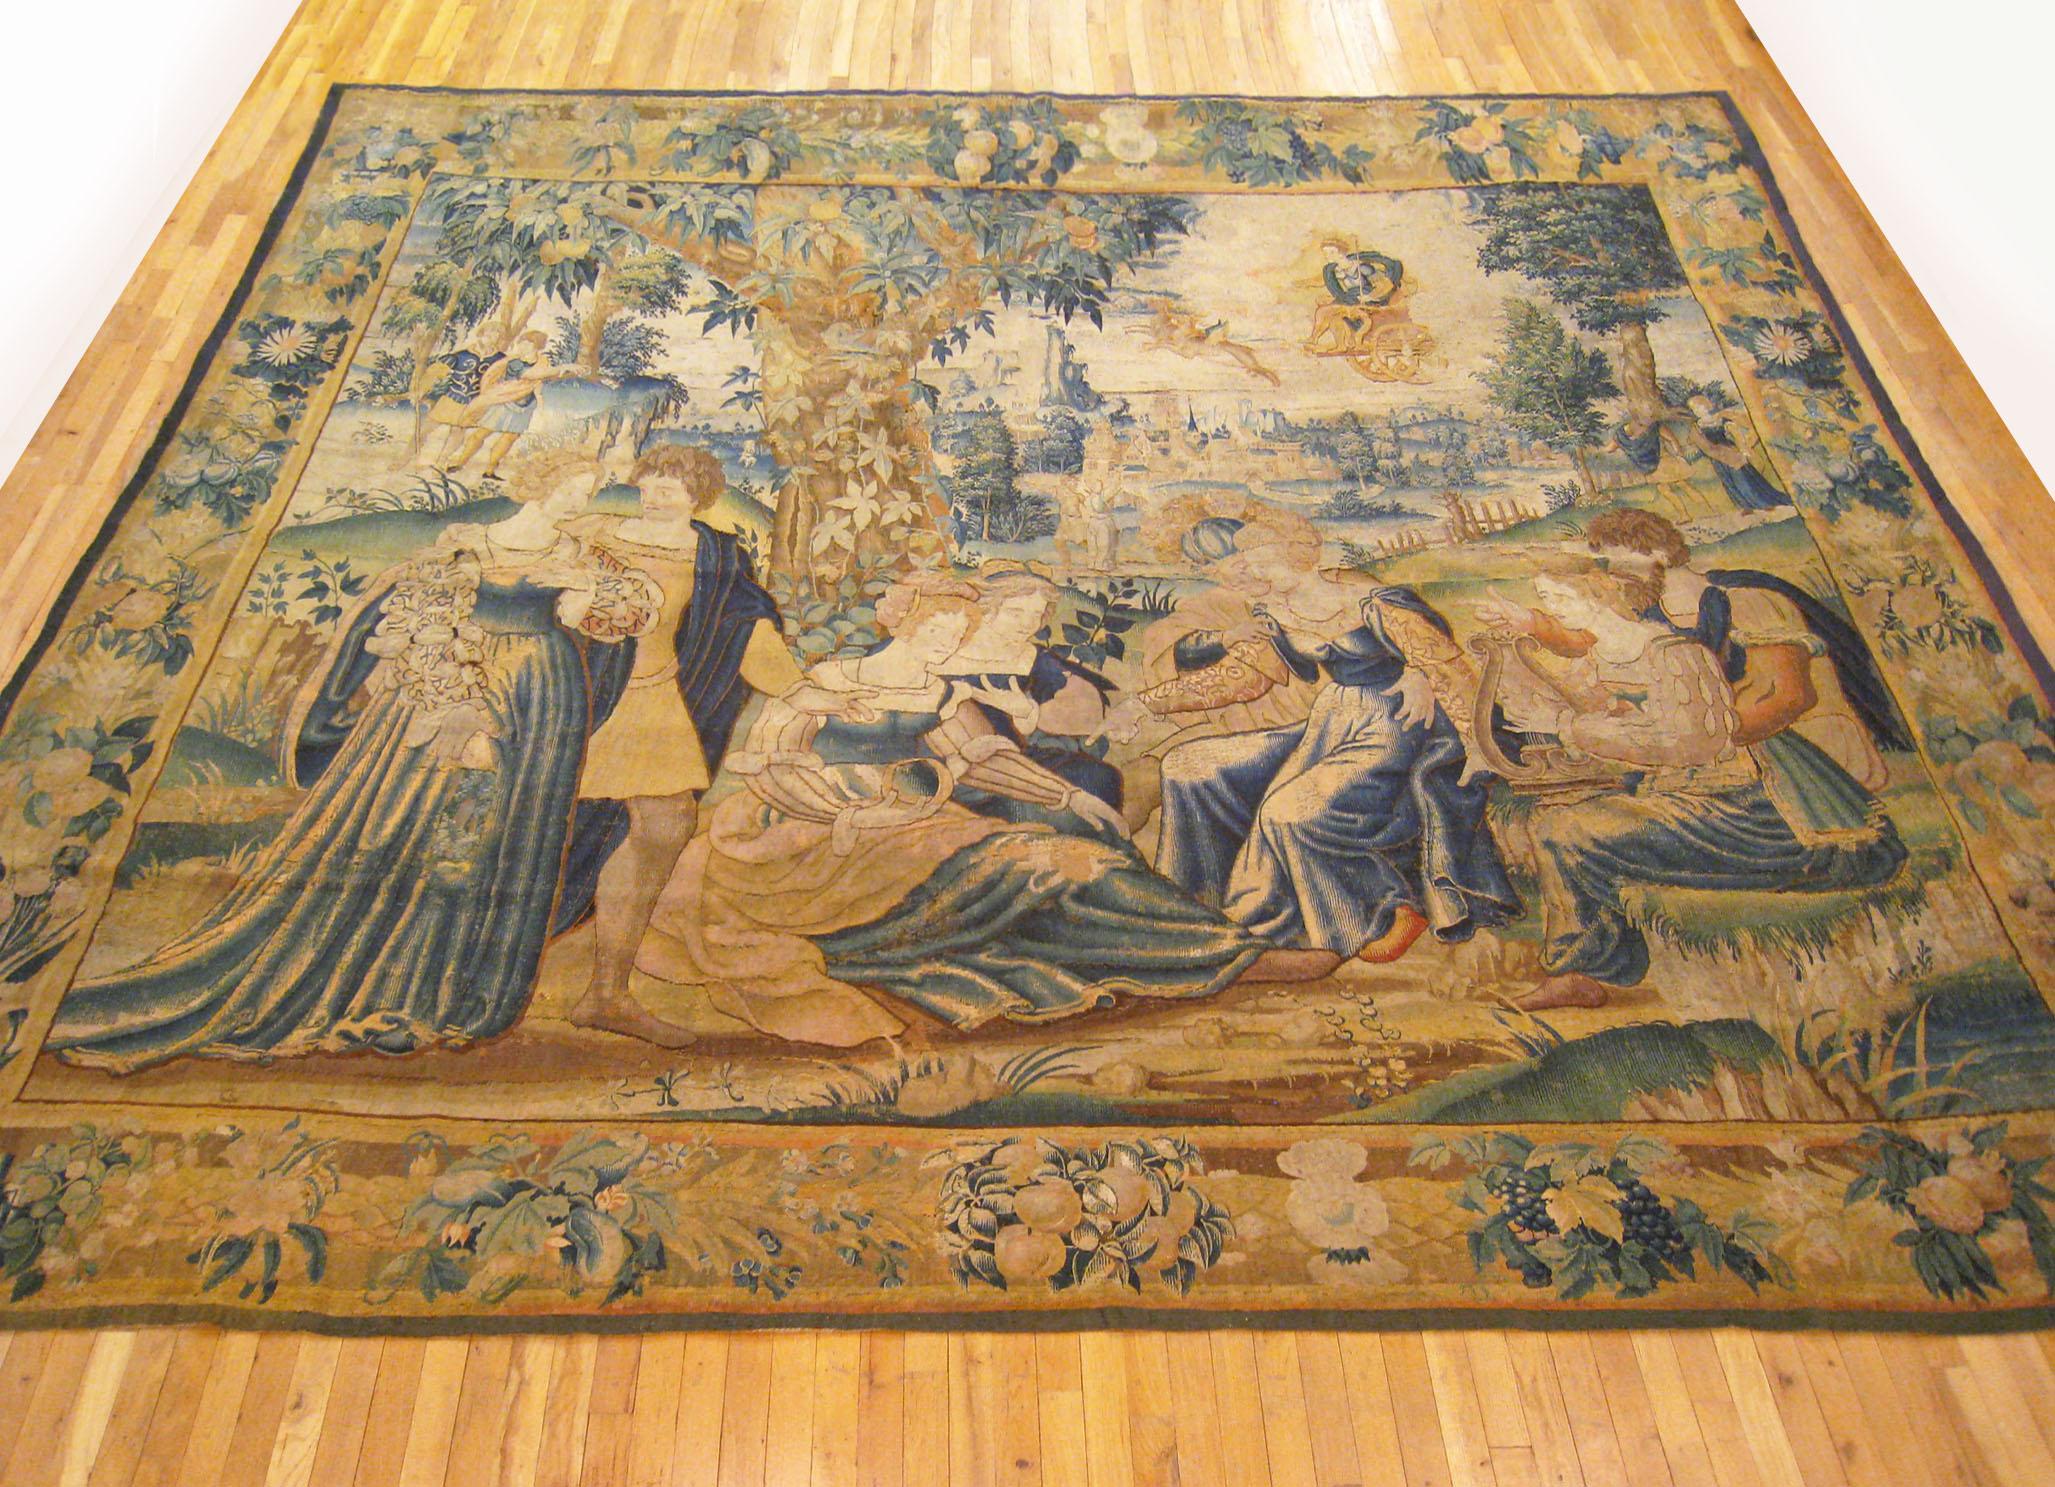 An antique 18th century Flemish mythological tapestry, size 11'0 H x 12'6 W. This period European tapestry depicts the Greek God Apollo, who is the deity of the arts, poetry, crops, and herds, and also presided over religious and civil law. Apollo